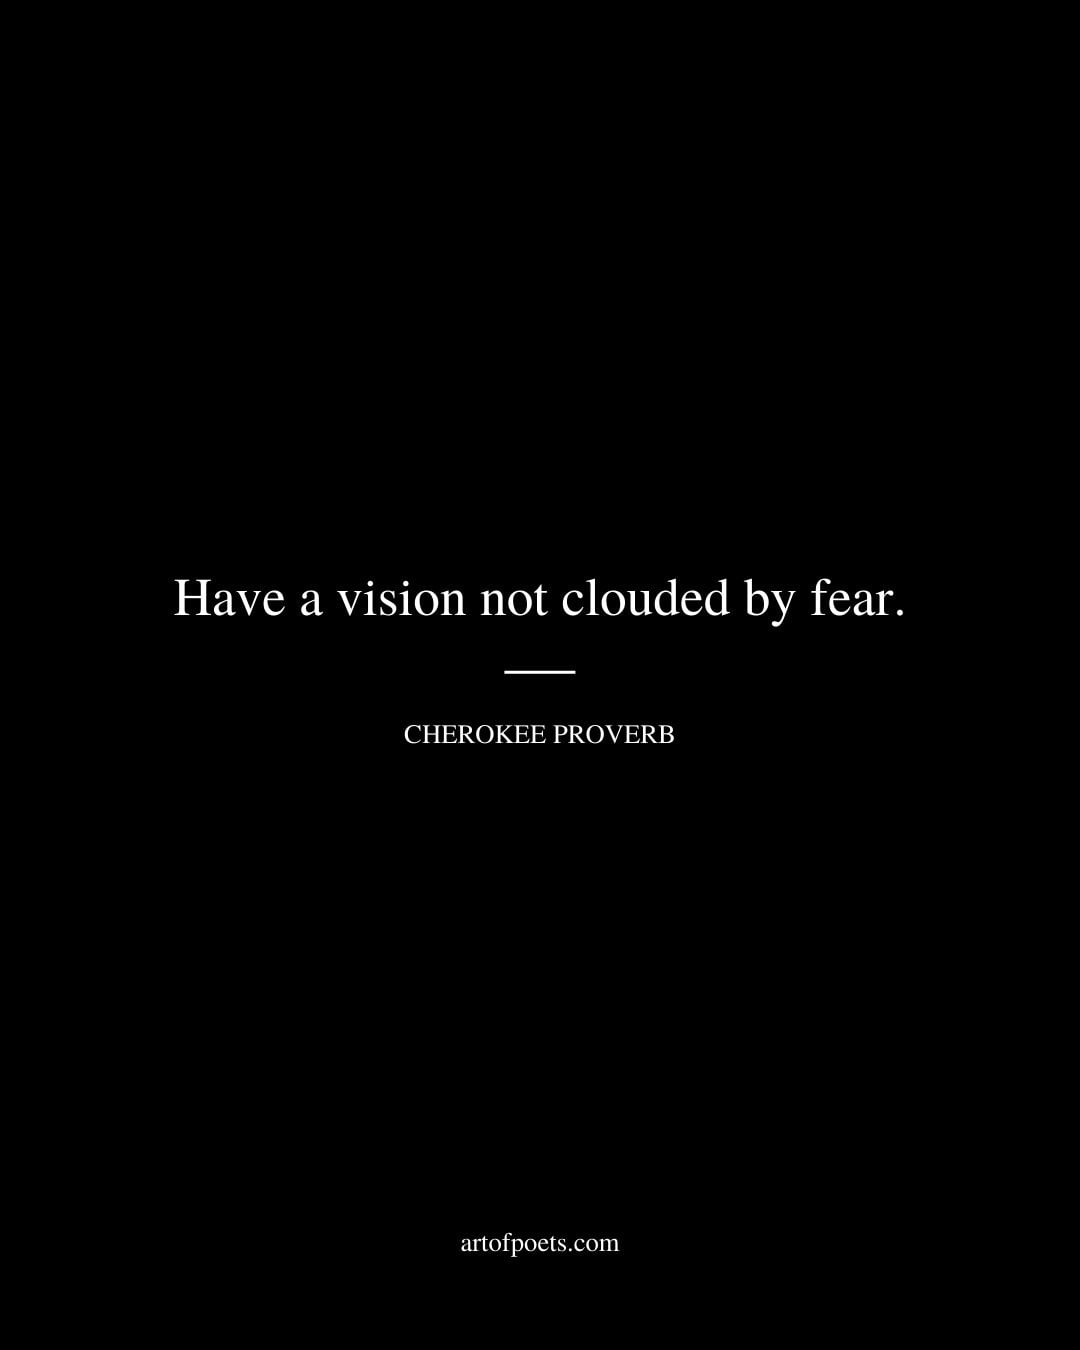 Have a vision not clouded by fear